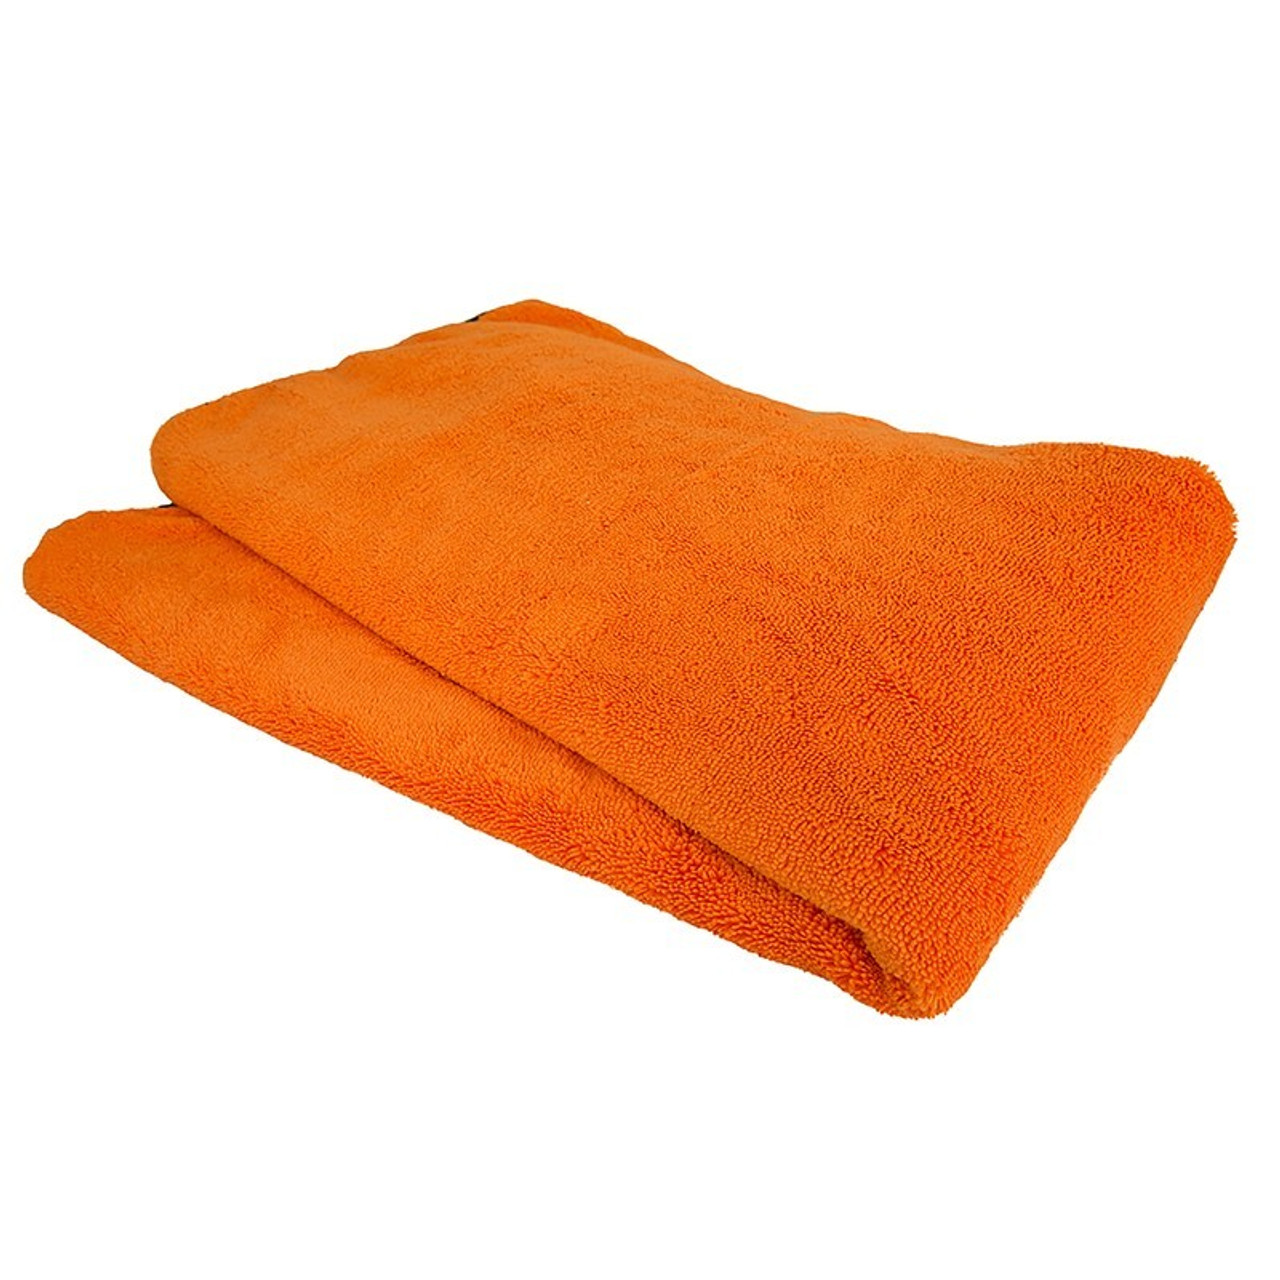 Chemical Guys Chenille Microfiber Wash Pad (P12)